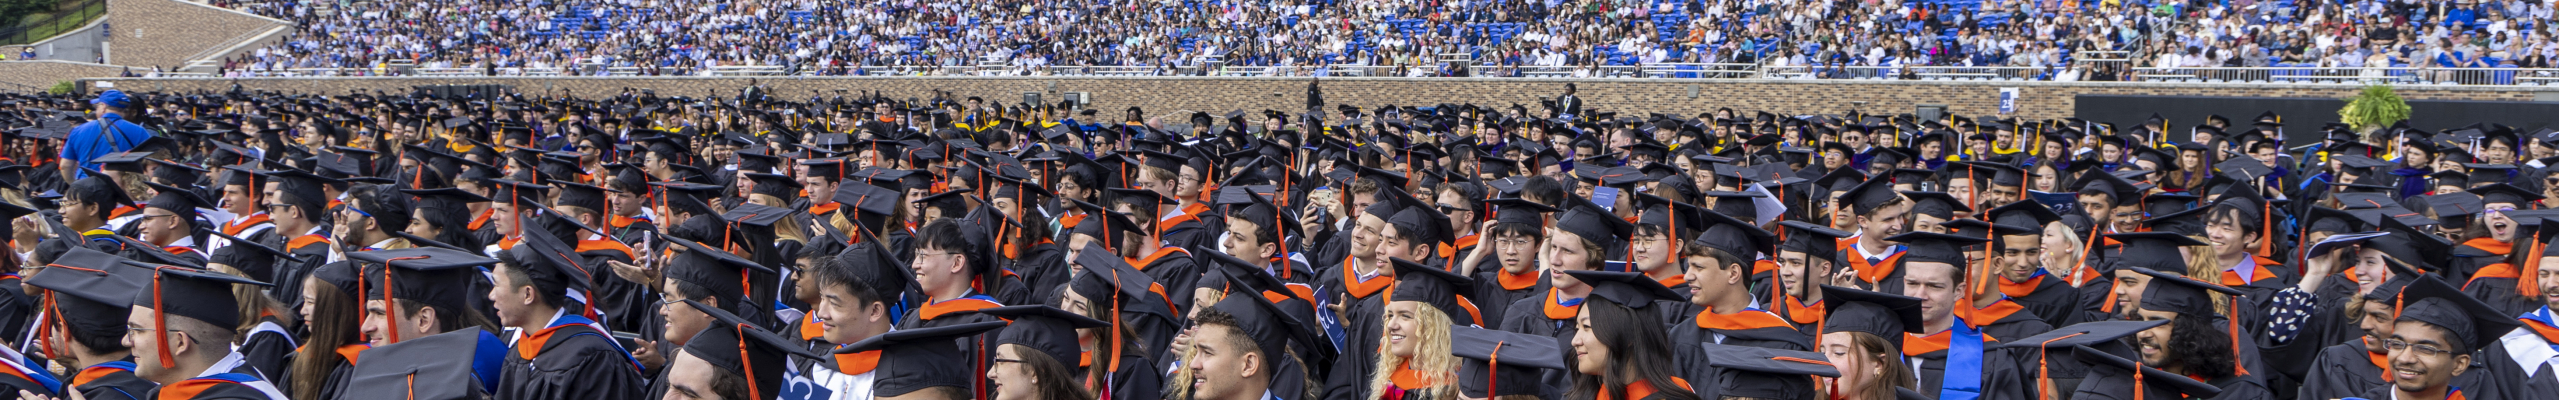 Duke Engineering Class of 2023 in caps and gowns at Wallace Wade Stadium